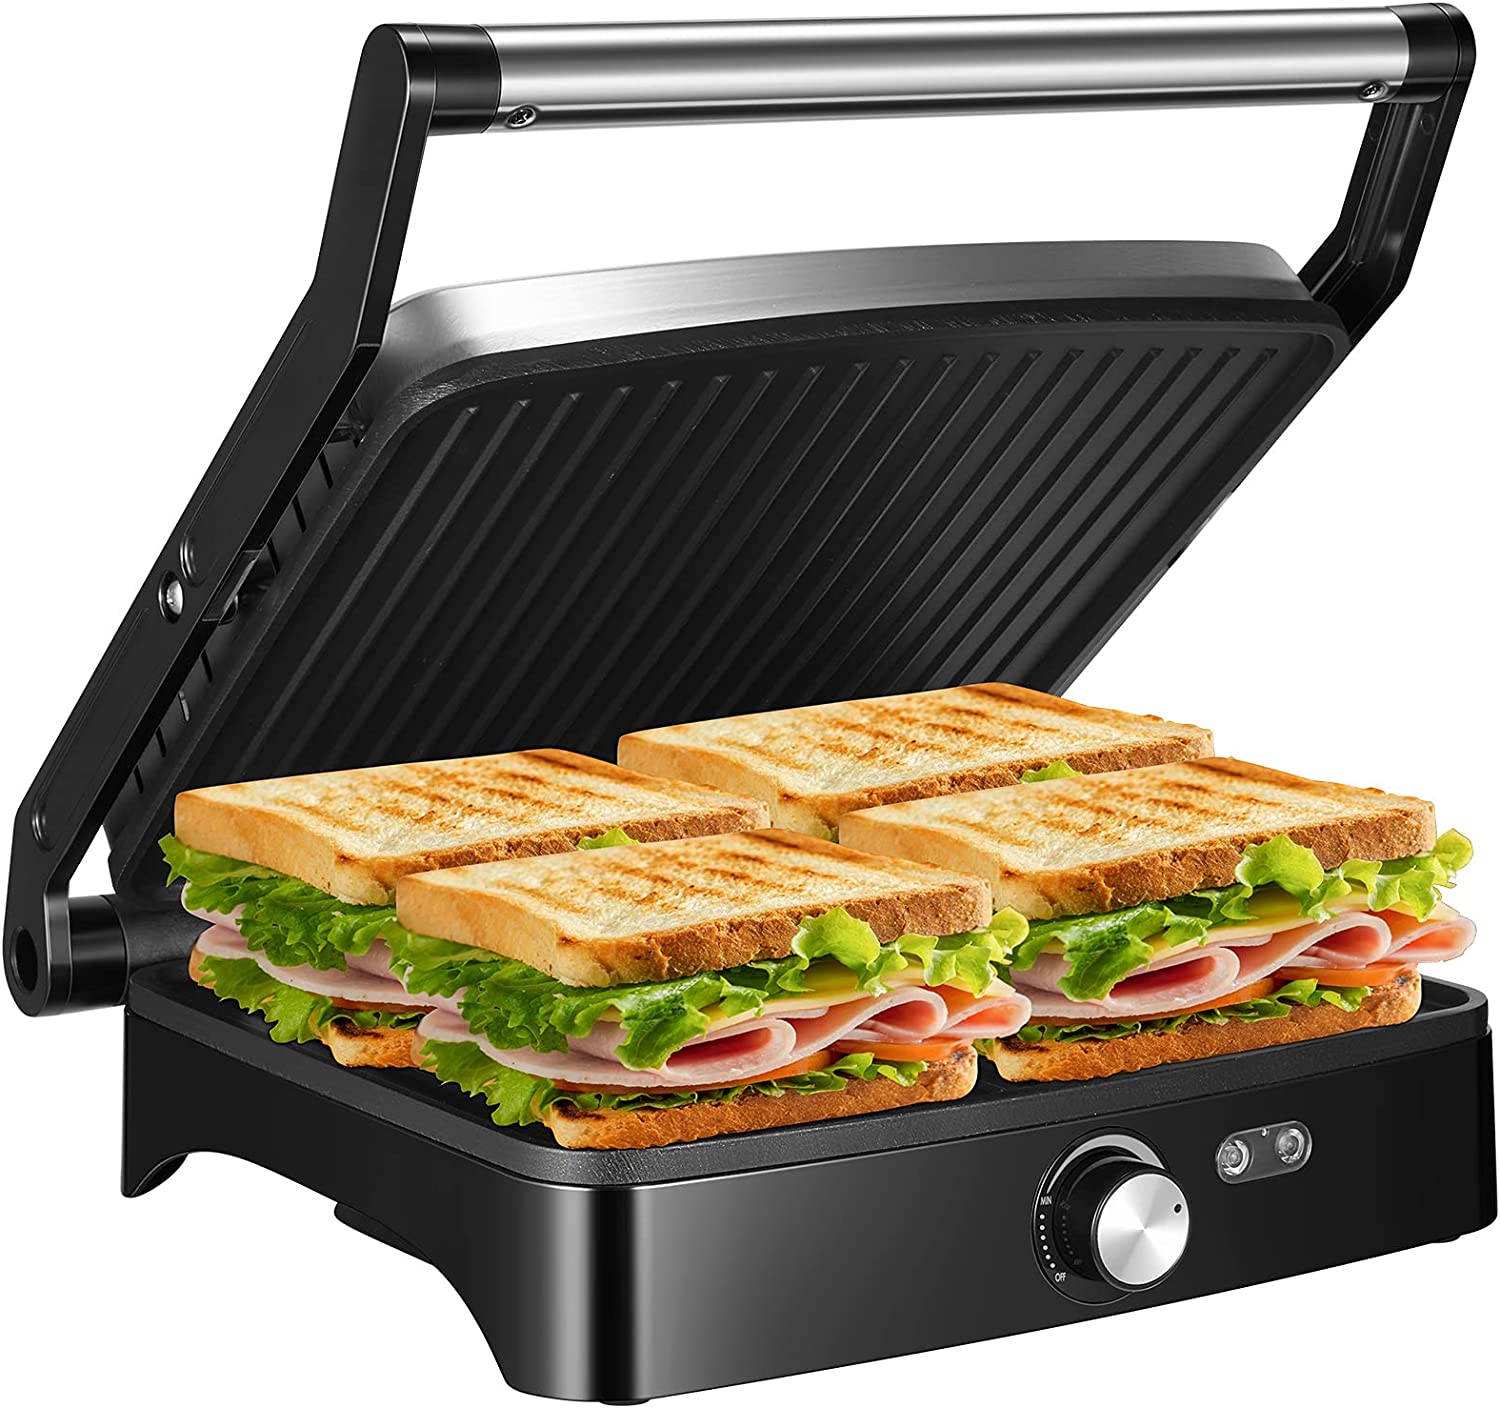 kig ind passage søm OSTBA Stainless Steel 3-In-1 Panini Press